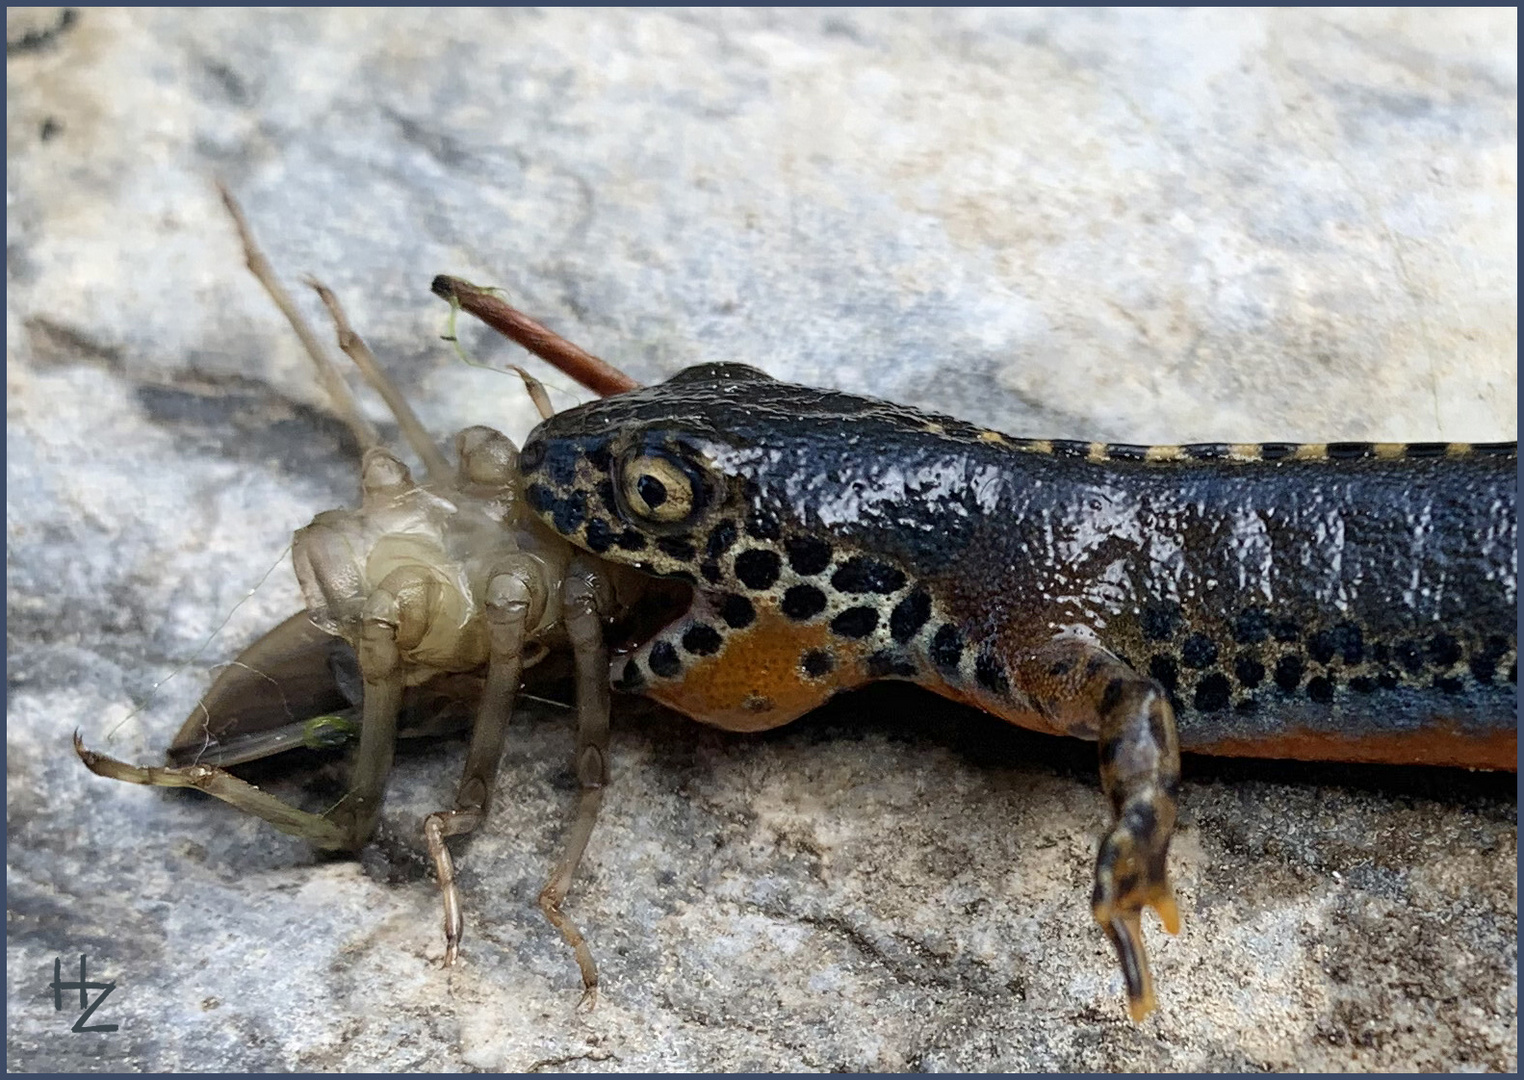 newt eating a dragonfly nymph